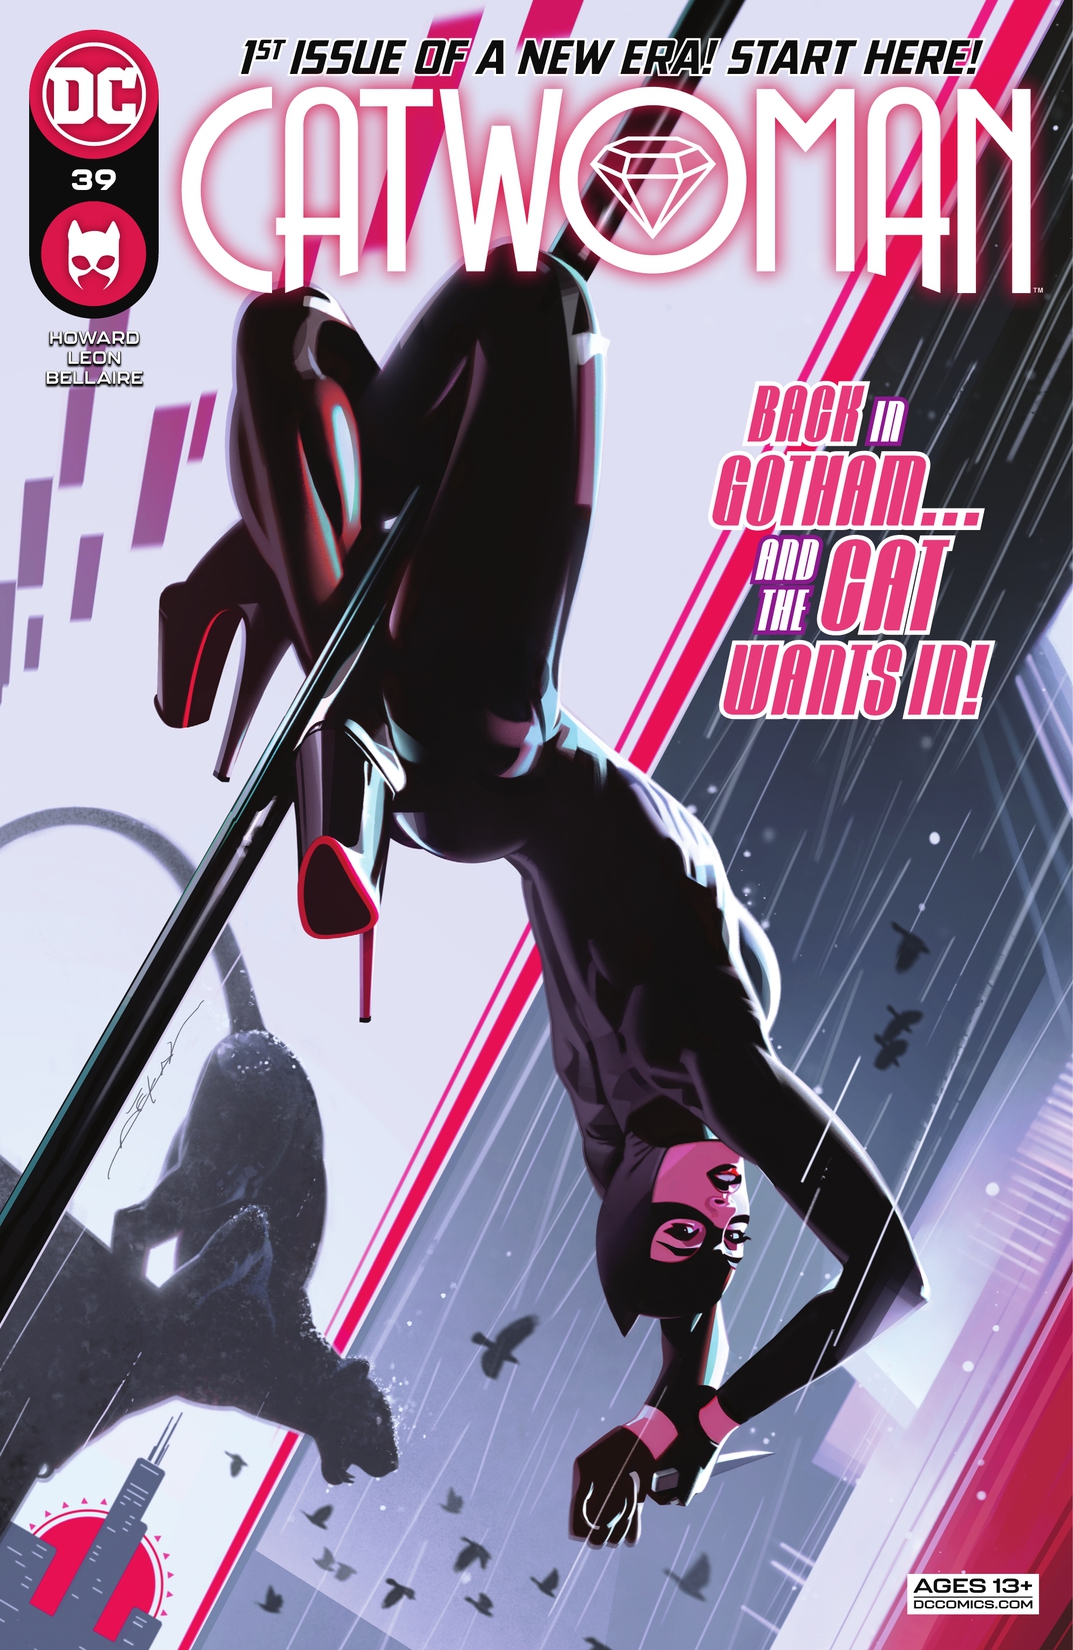 Catwoman (2018-) #39 preview images